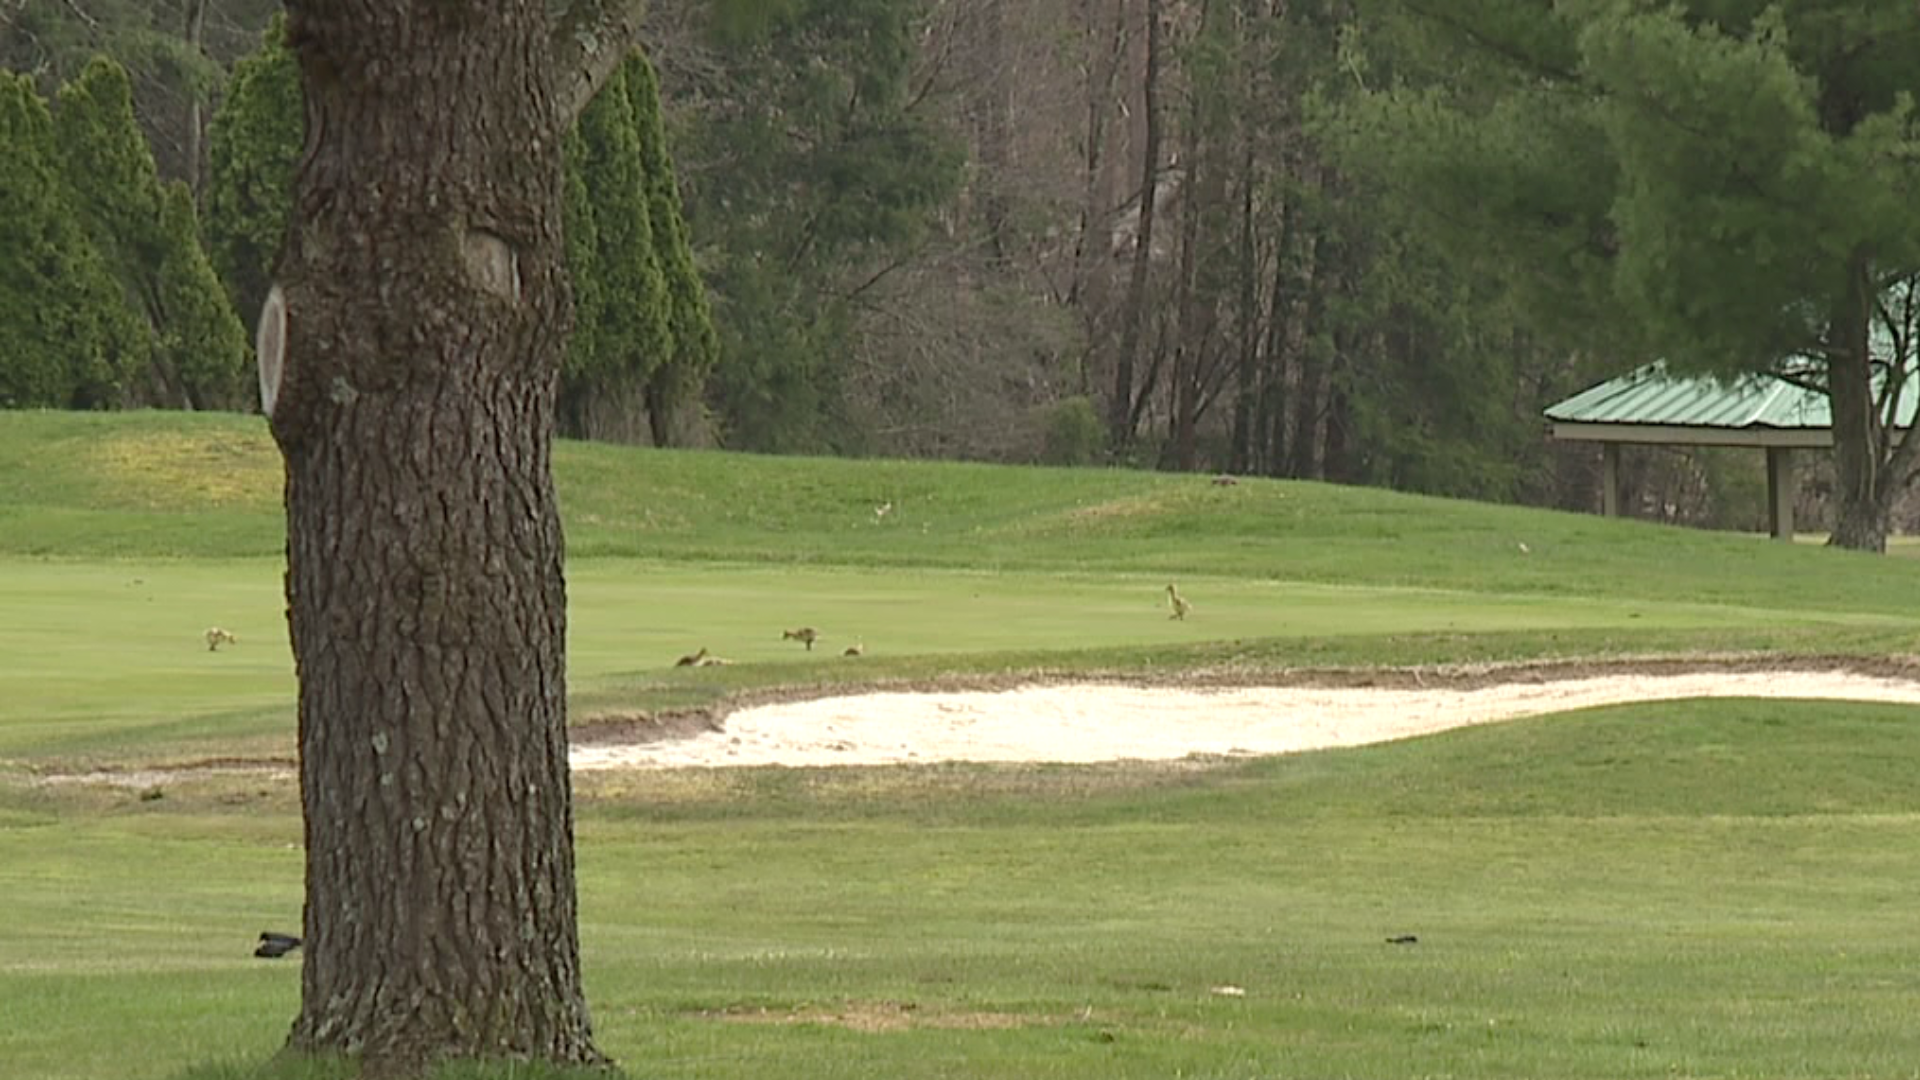 One local golf course prepares to open after surviving a tornado and now a pandemic.